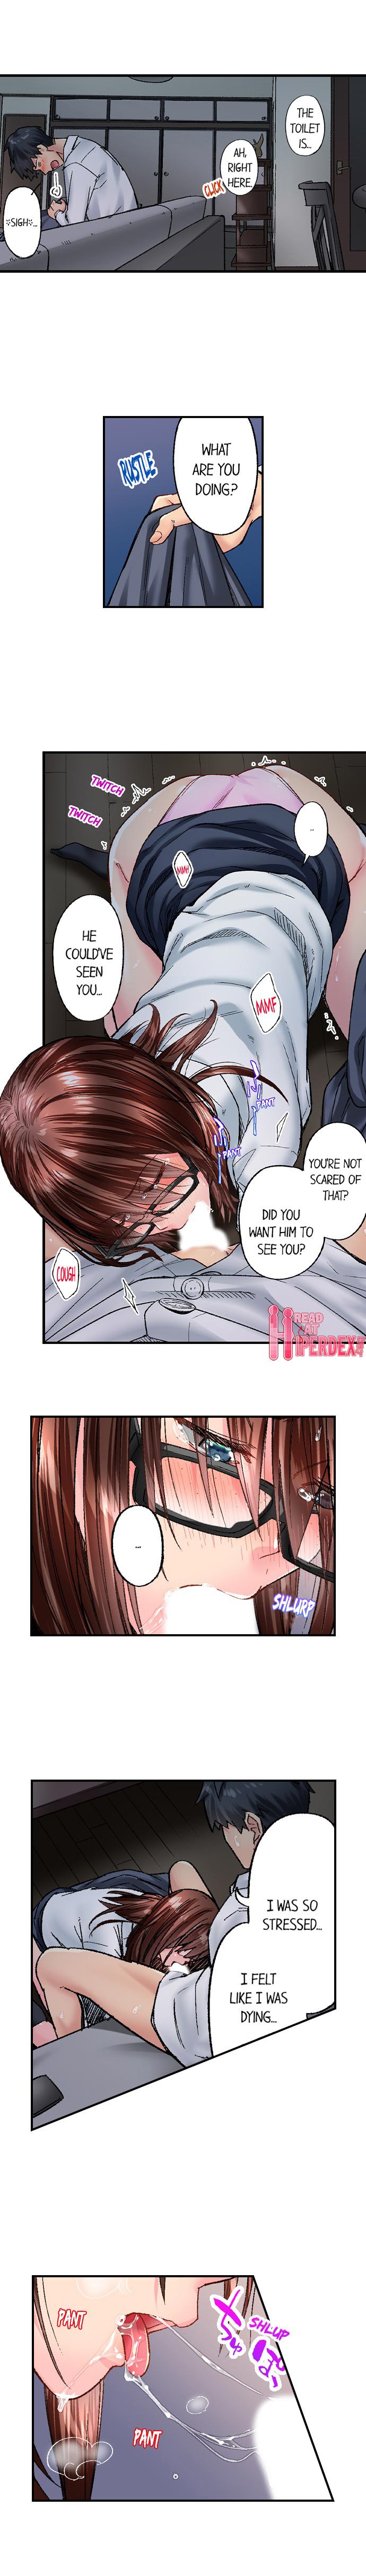 simple-yet-sexy-chap-31-7